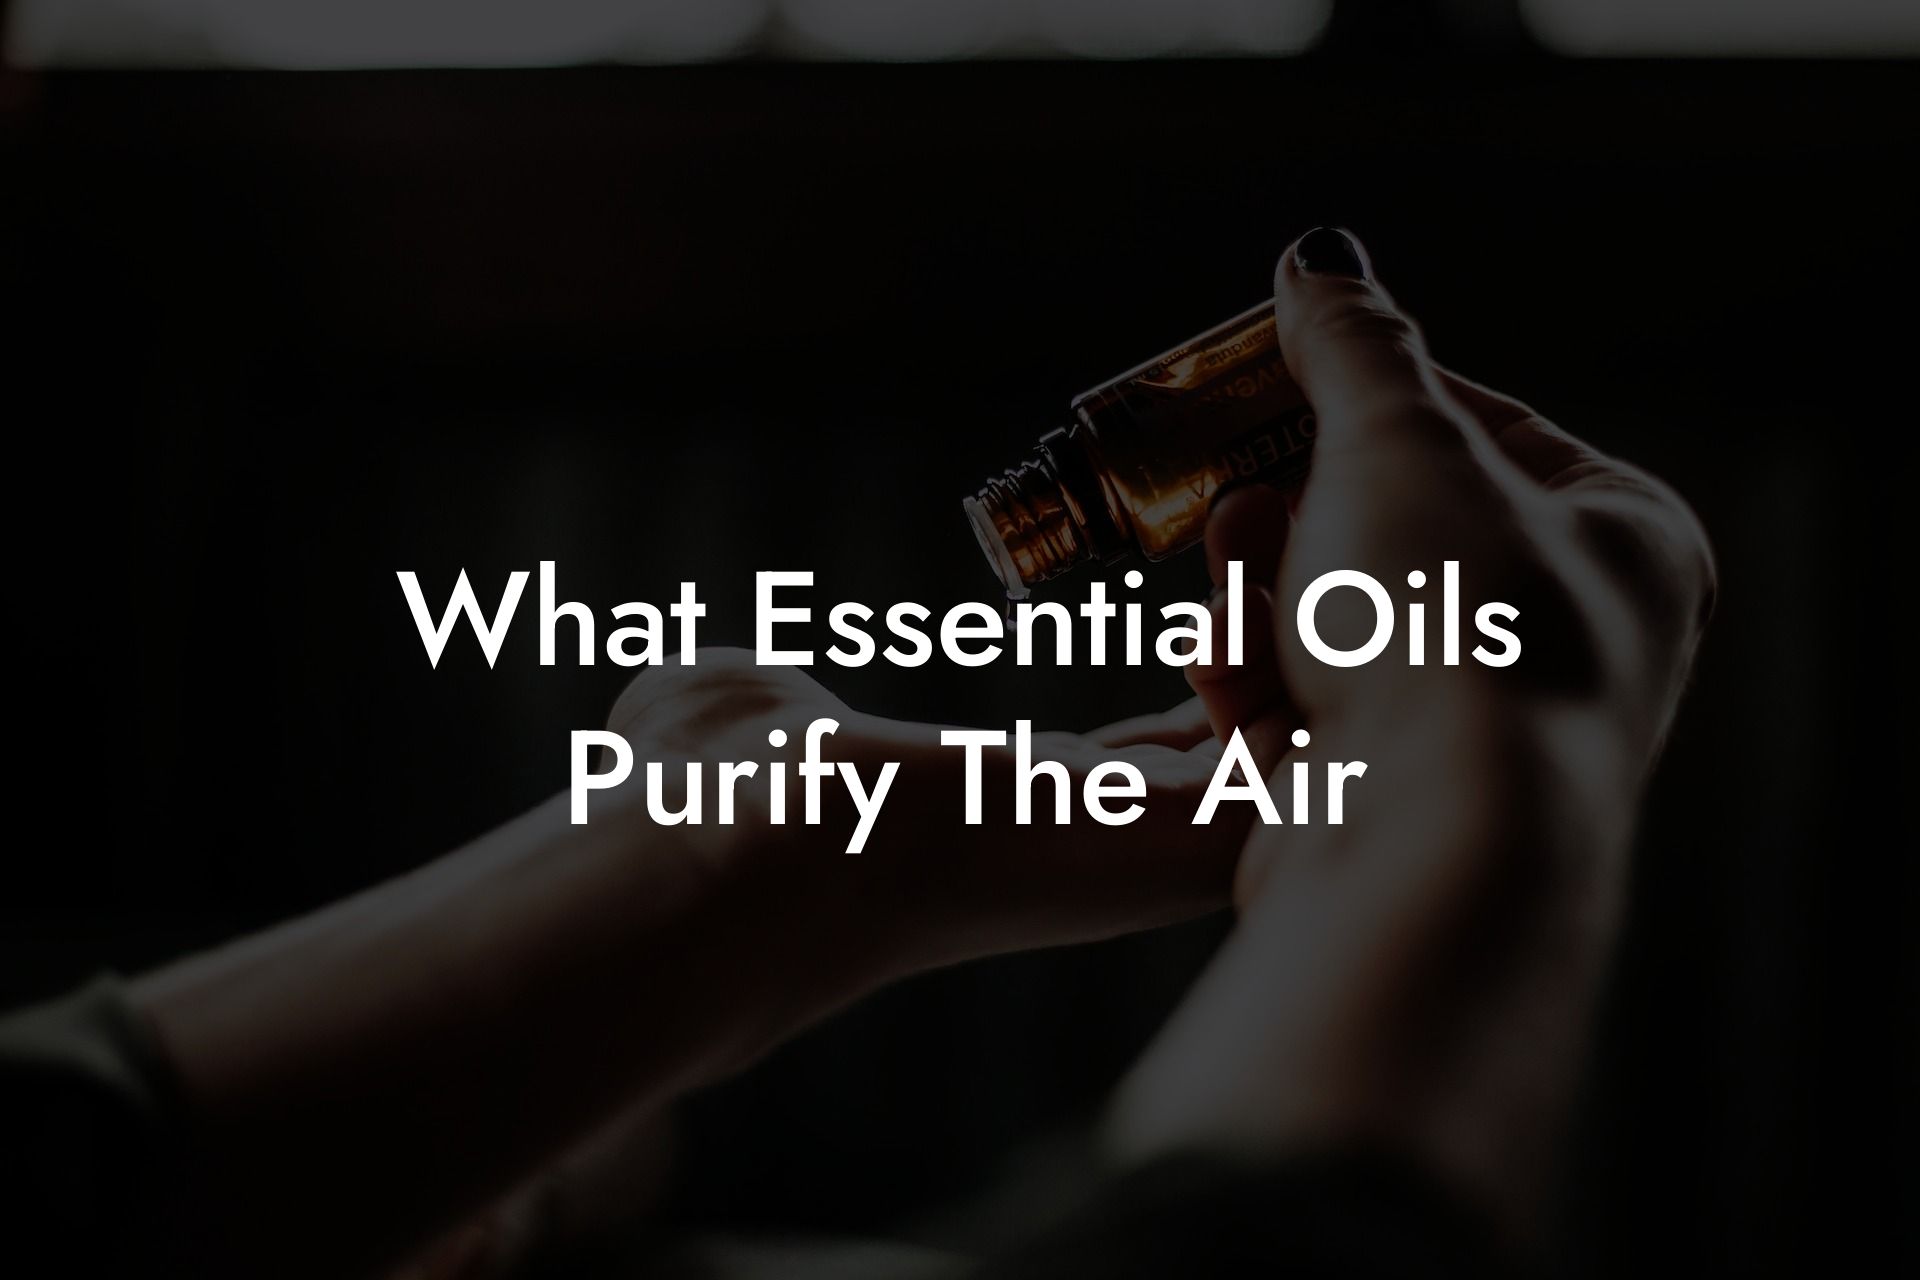 What Essential Oils Purify The Air